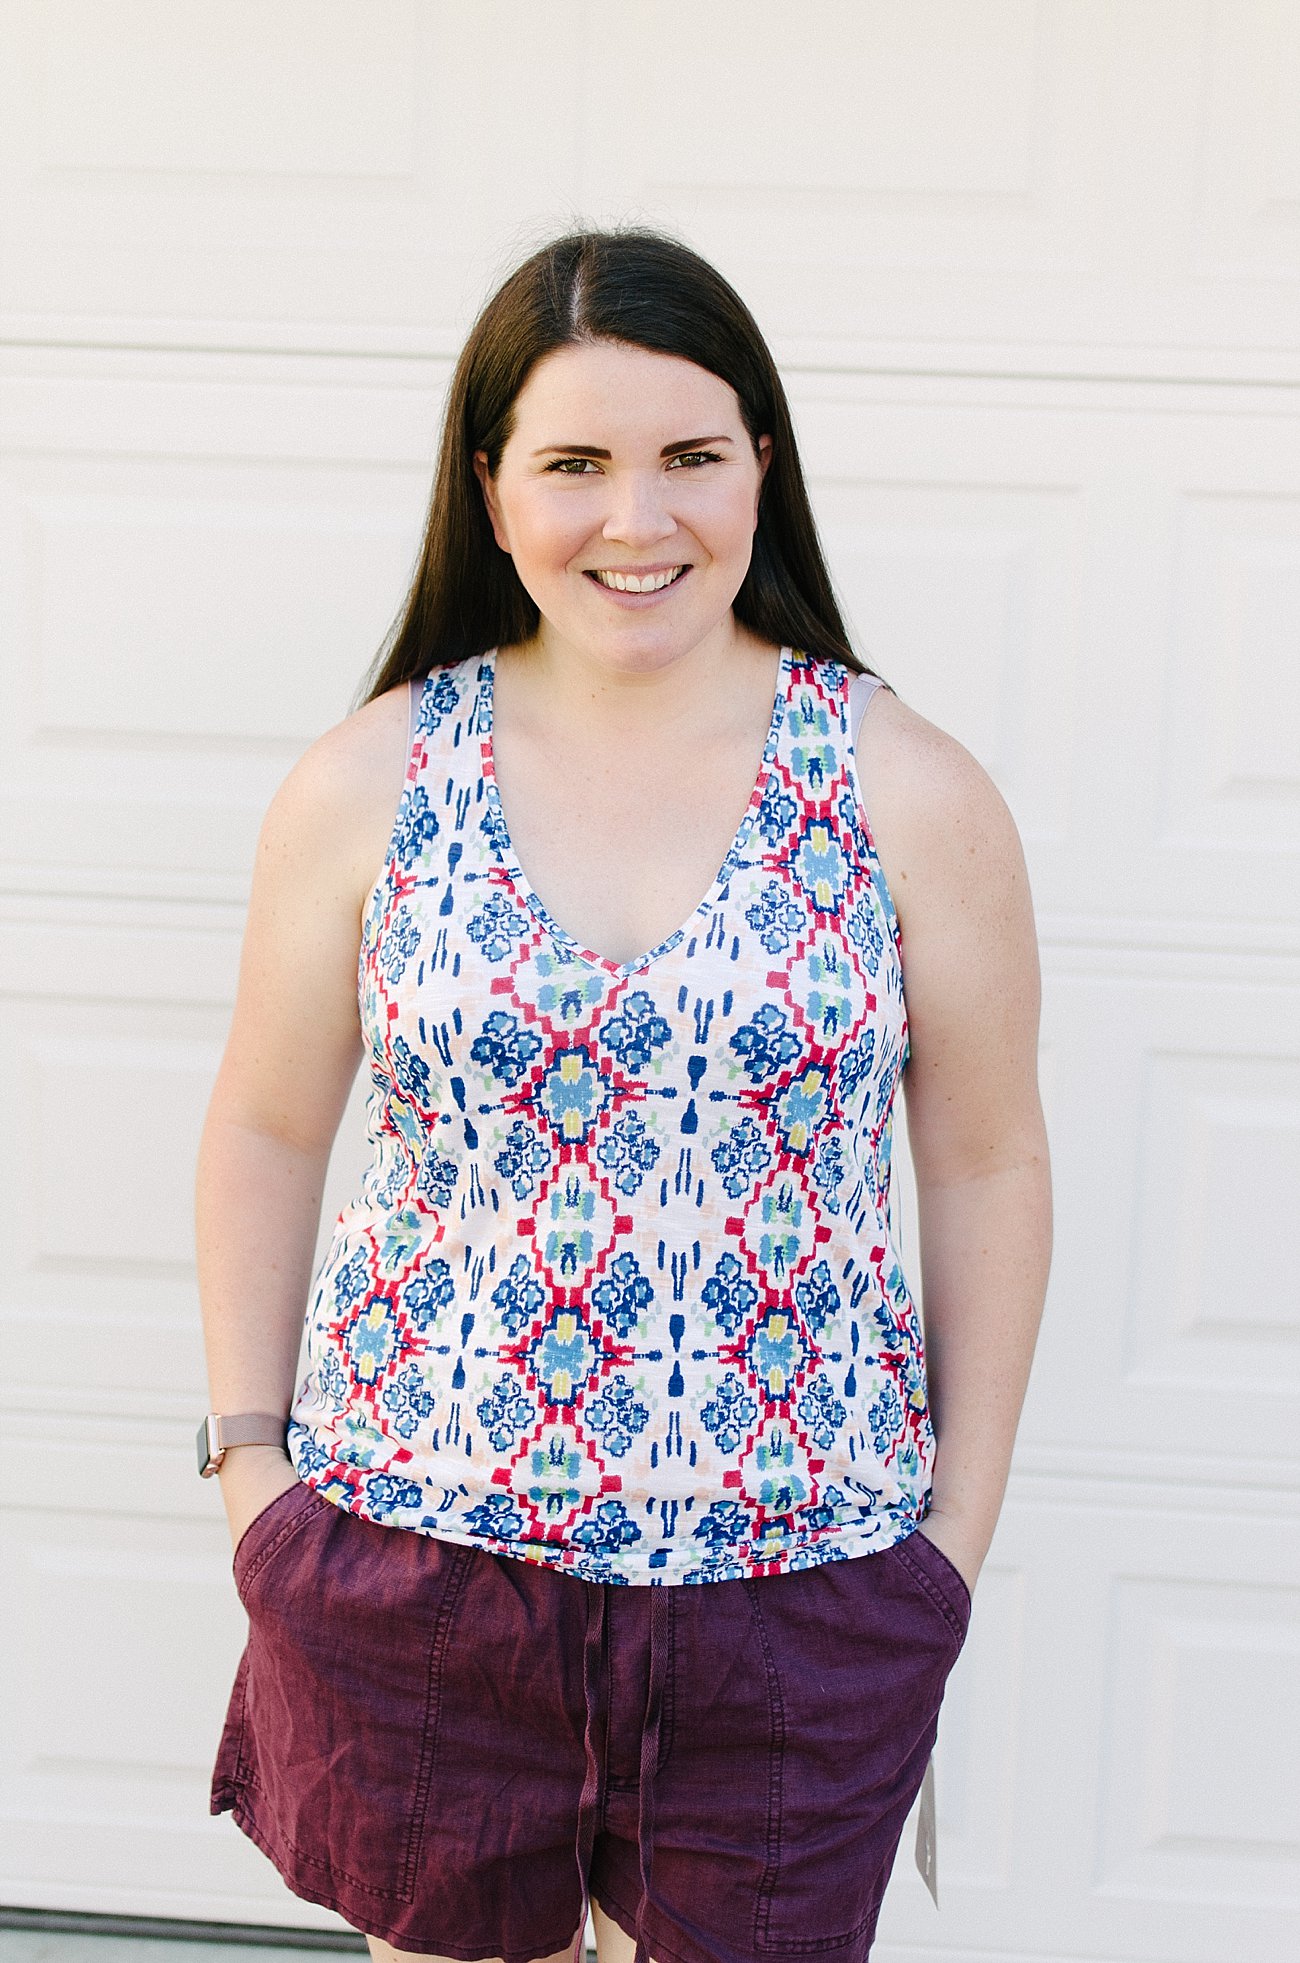 Ella Moss "Mazie Cross Back Knit Top" - Size L - $118 (Made in the USA) - Stitch Fix Review #48 by North Carolina ethical fashion blogger Still Being Molly